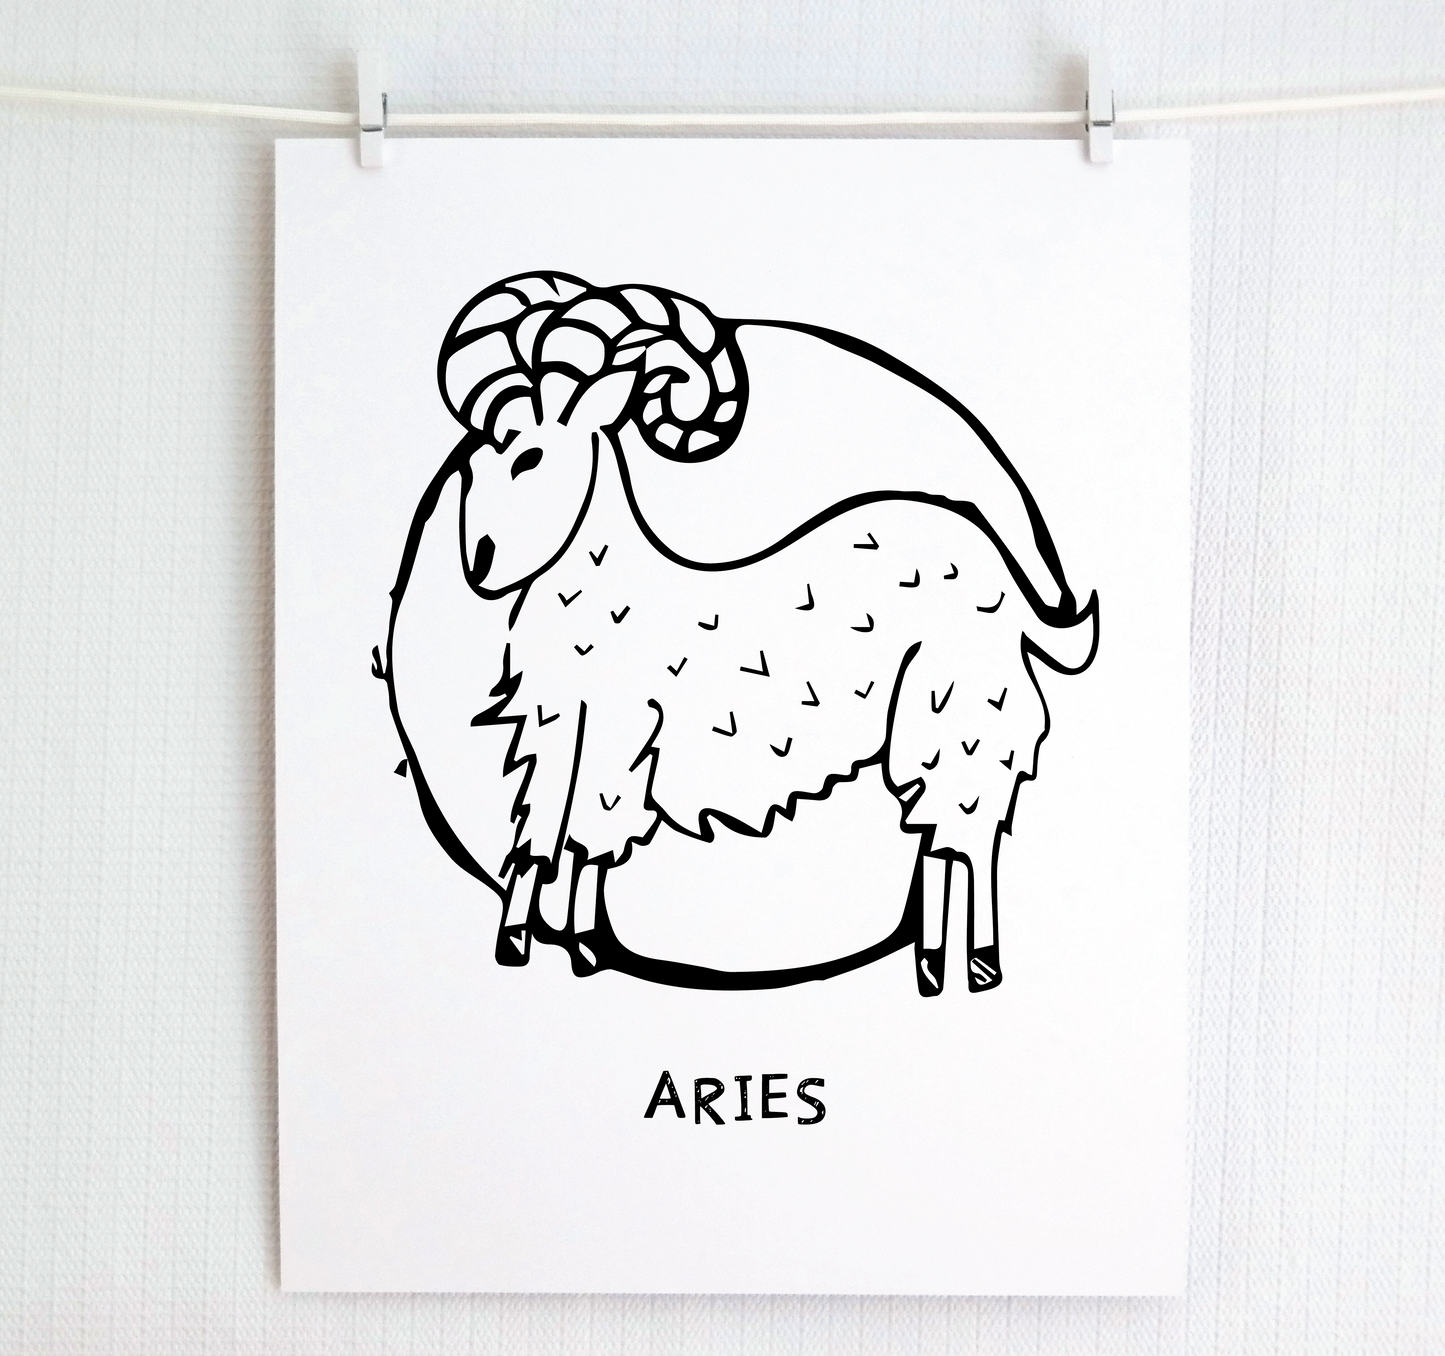 Signs of the Zodiac: ARIES